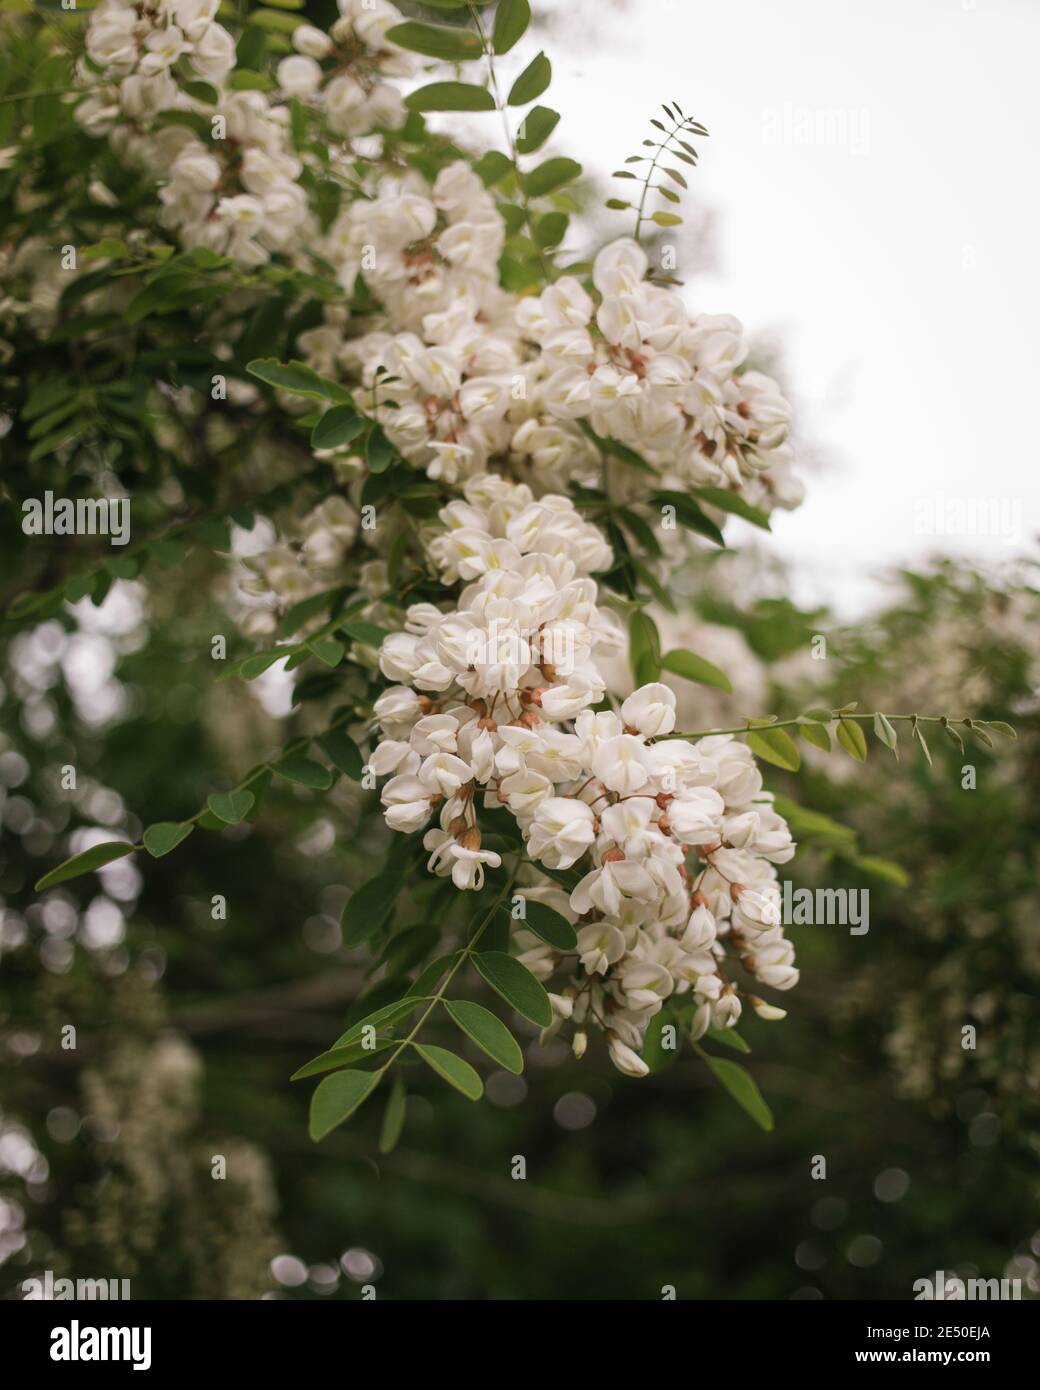 Close Up of White Flowers Hanging from a Tree with Shallow Depth of Field, Nahant, Massachusetts, USA Stock Photo